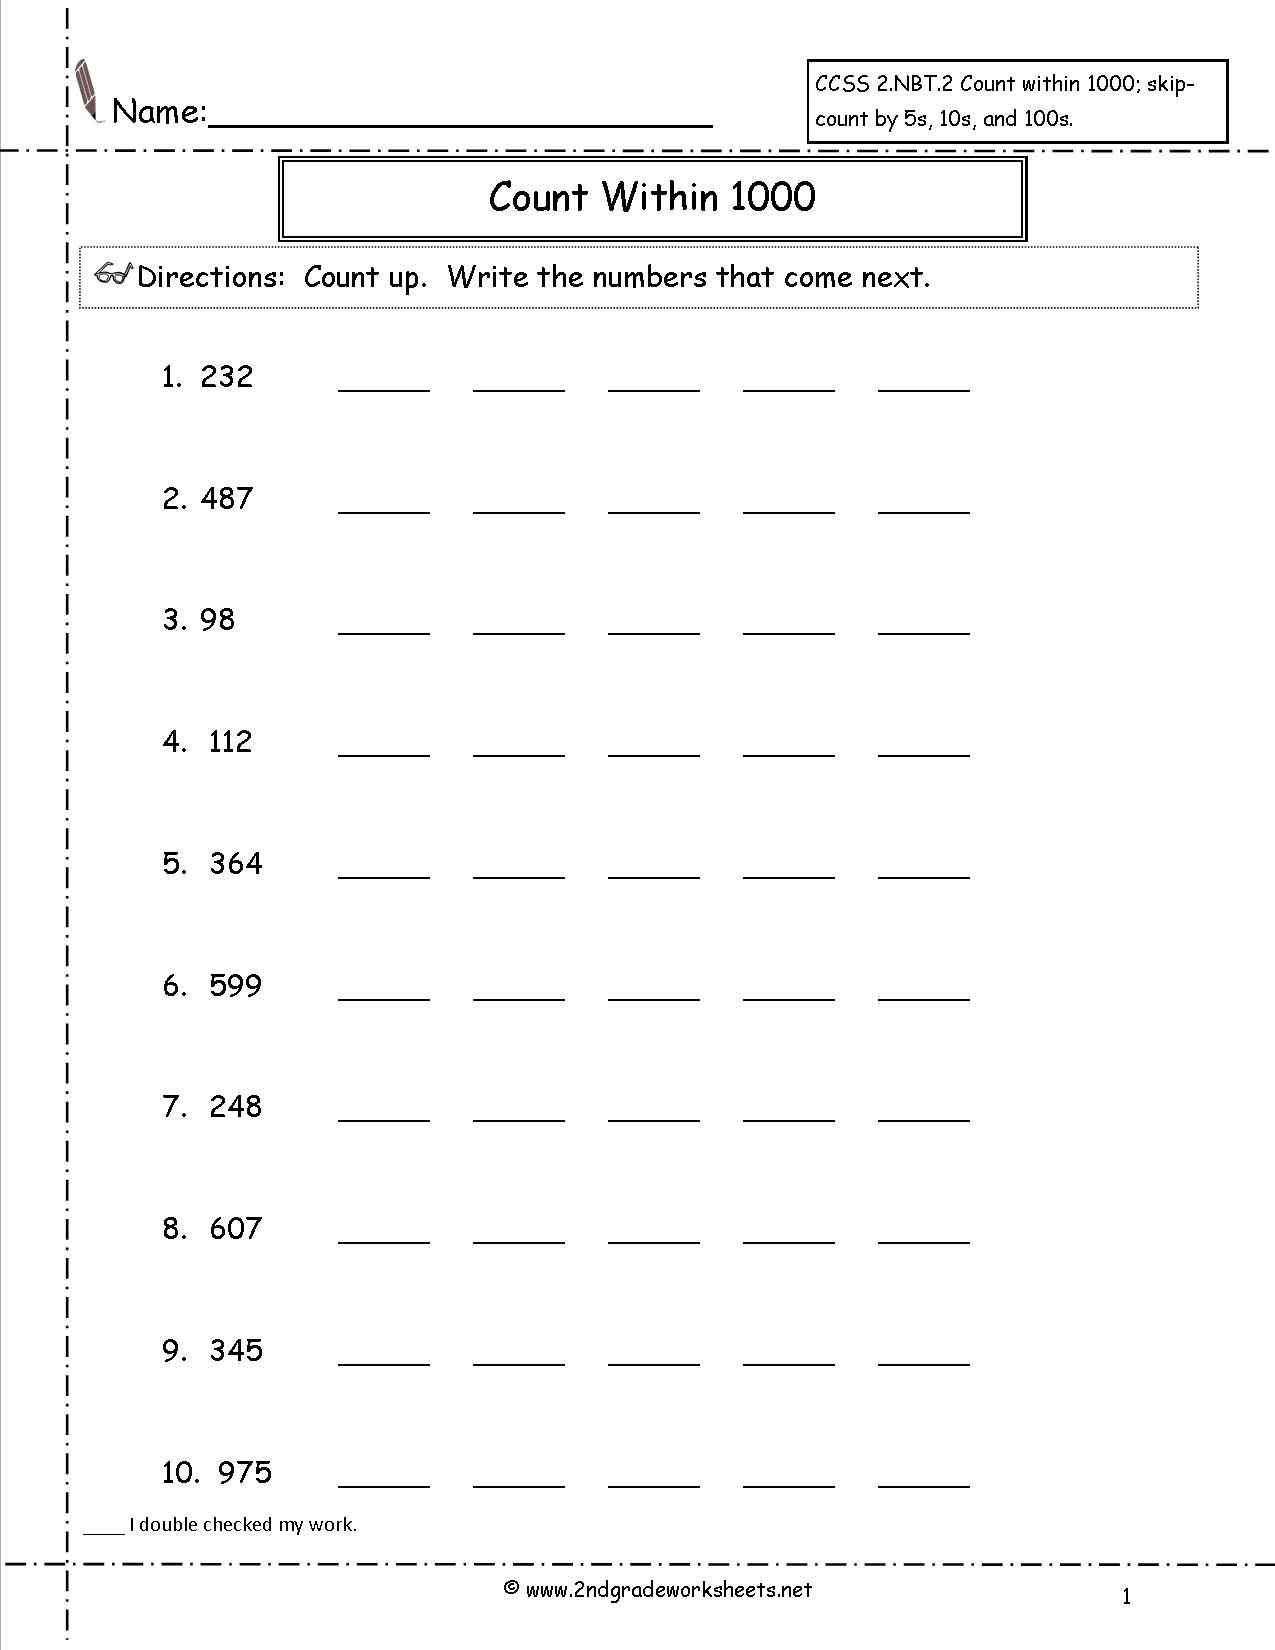 Ccss 2Nbt2 Worksheets Also Number And Operations In Base Ten Grade 4 Worksheets